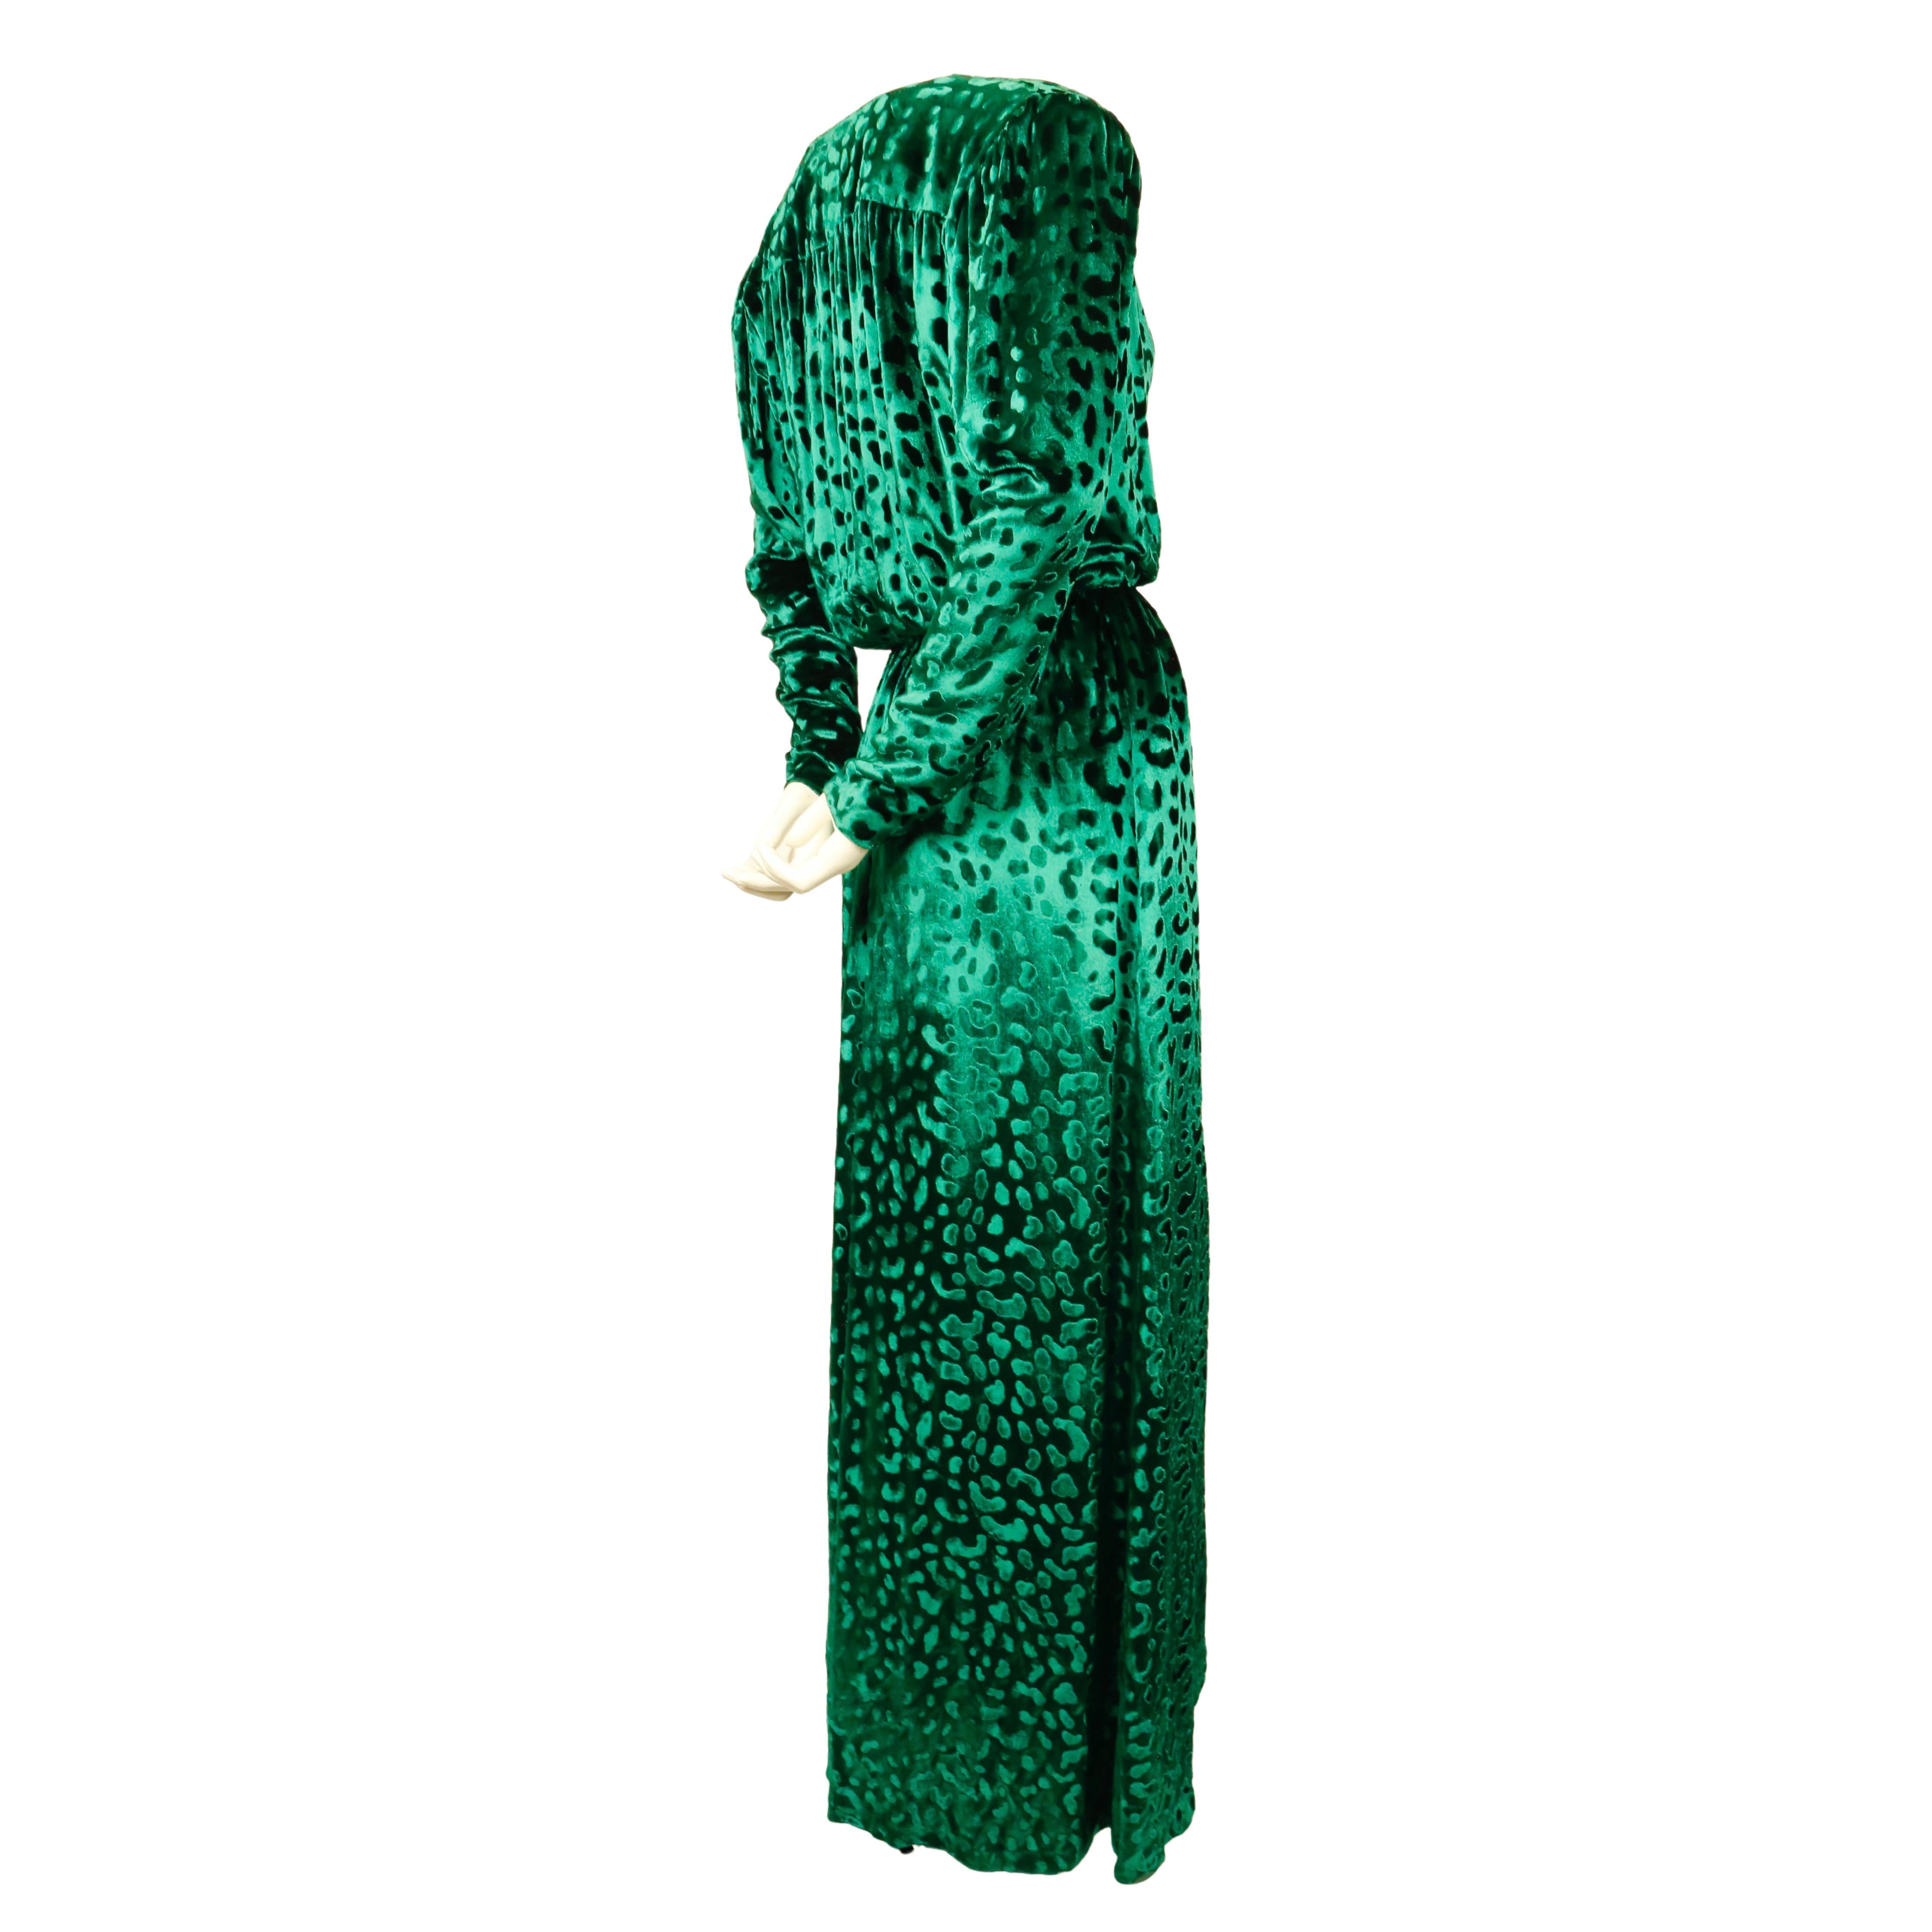 Vivid, emerald-green 'leopard' velvet evening gown with low cut neckline and long sleeves and zip cuffs designed by Saint Laurent dating to 1986. Variations of this gown were shown on Saint Laurent's runways through the mid 1980's. French size 38.